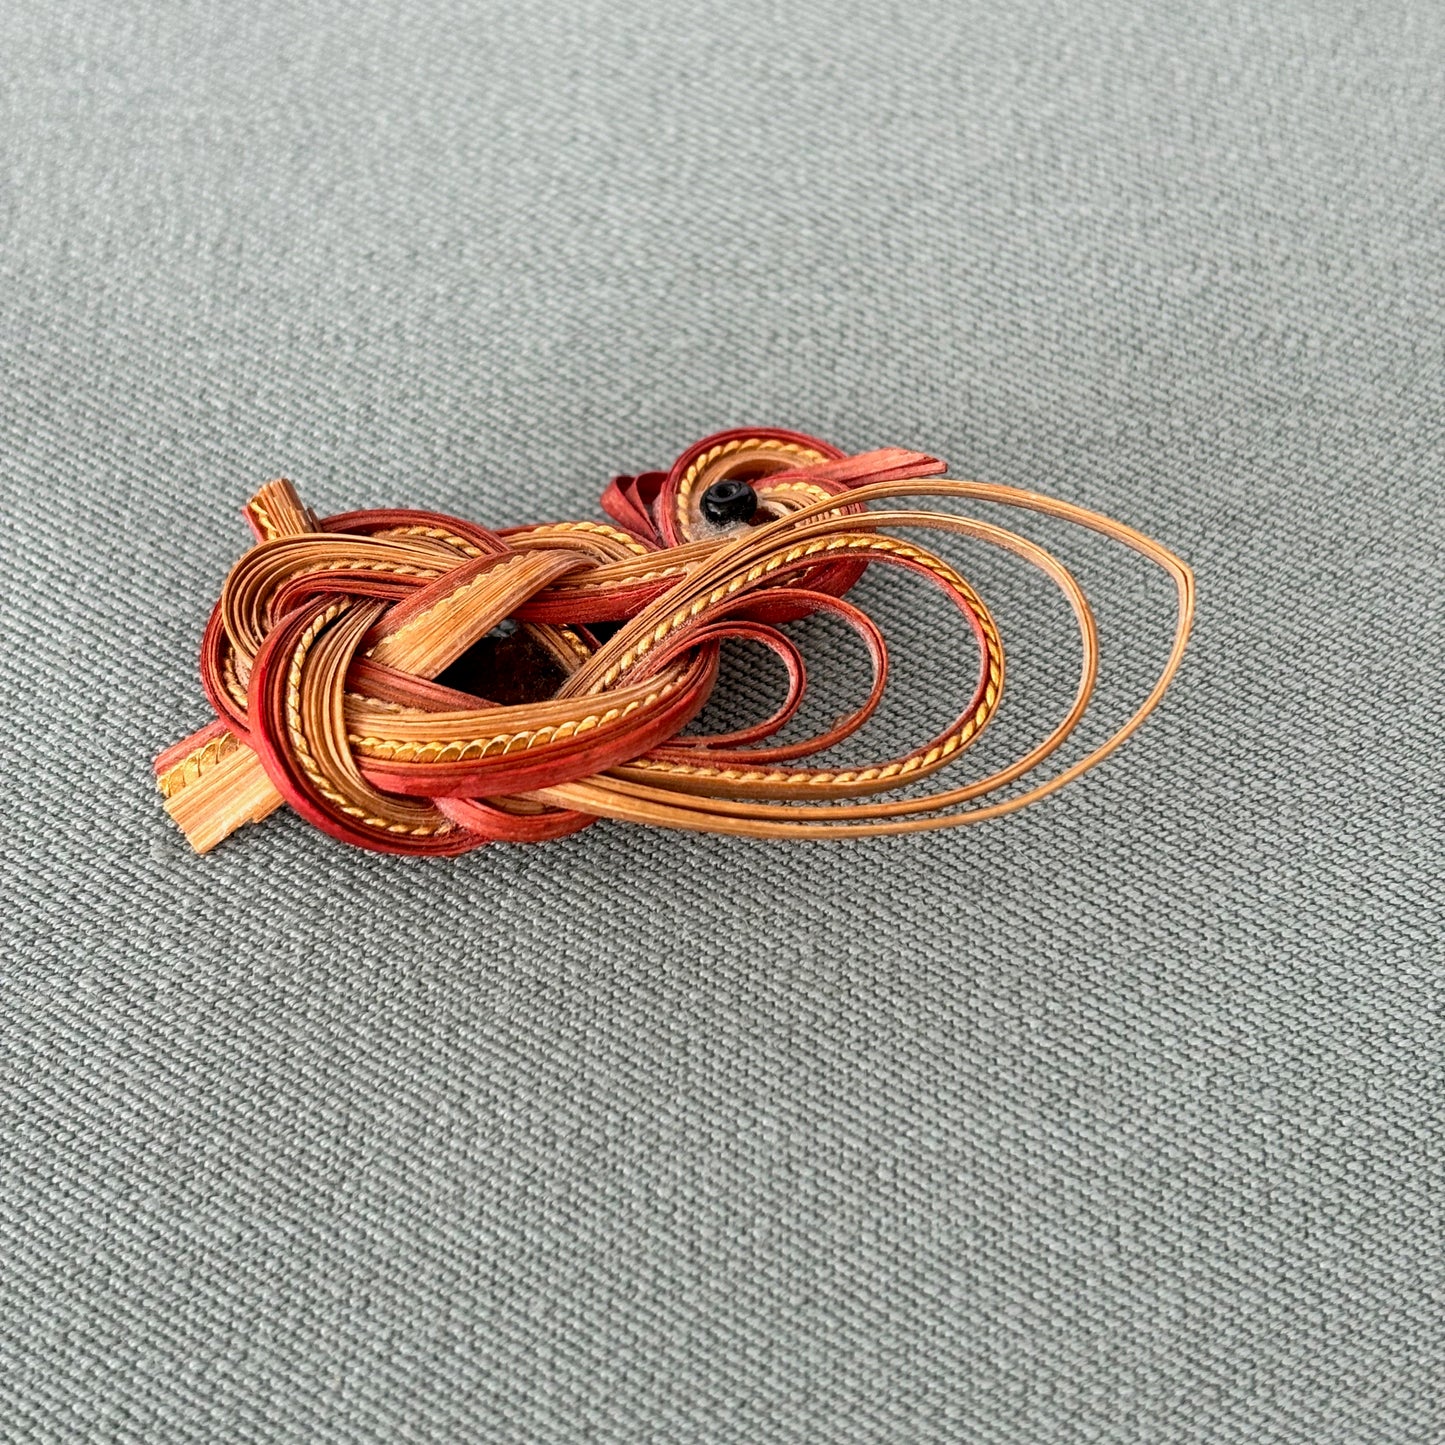 Vintage Twisted Bamboo Brooch